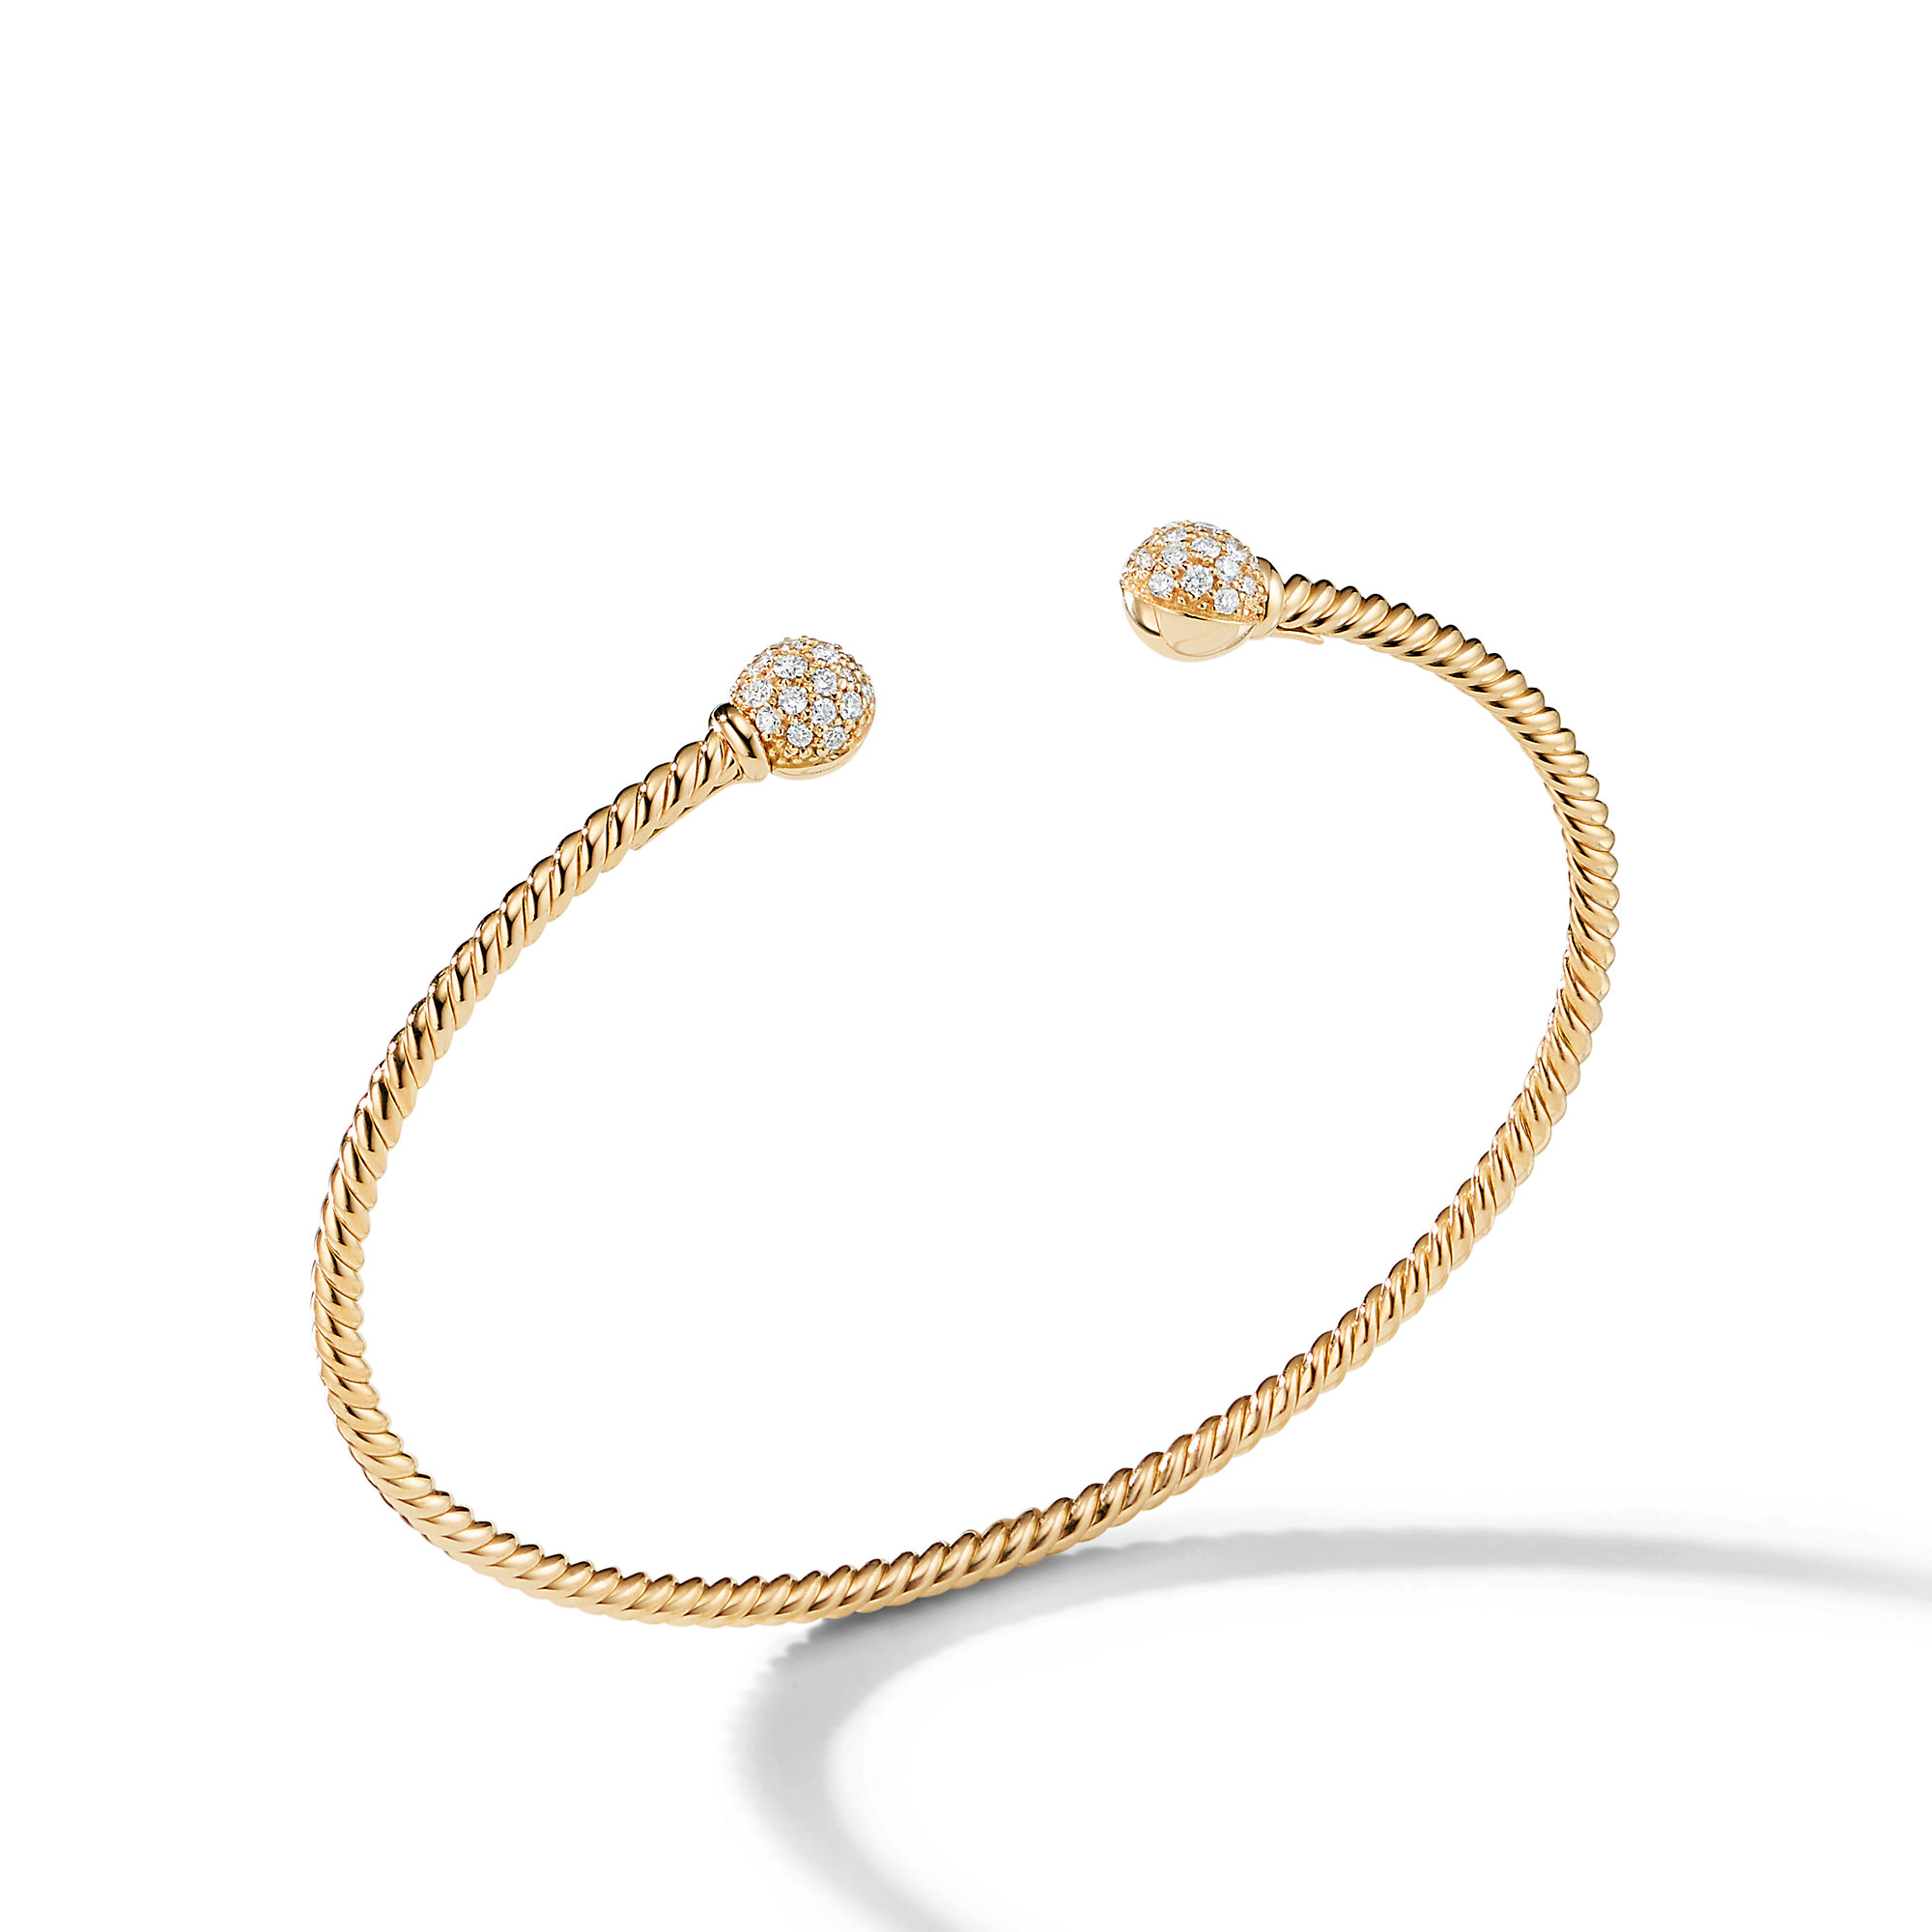 Solari Cablespira® Bracelet in 18K Yellow Gold with Diamonds, 2.6mm